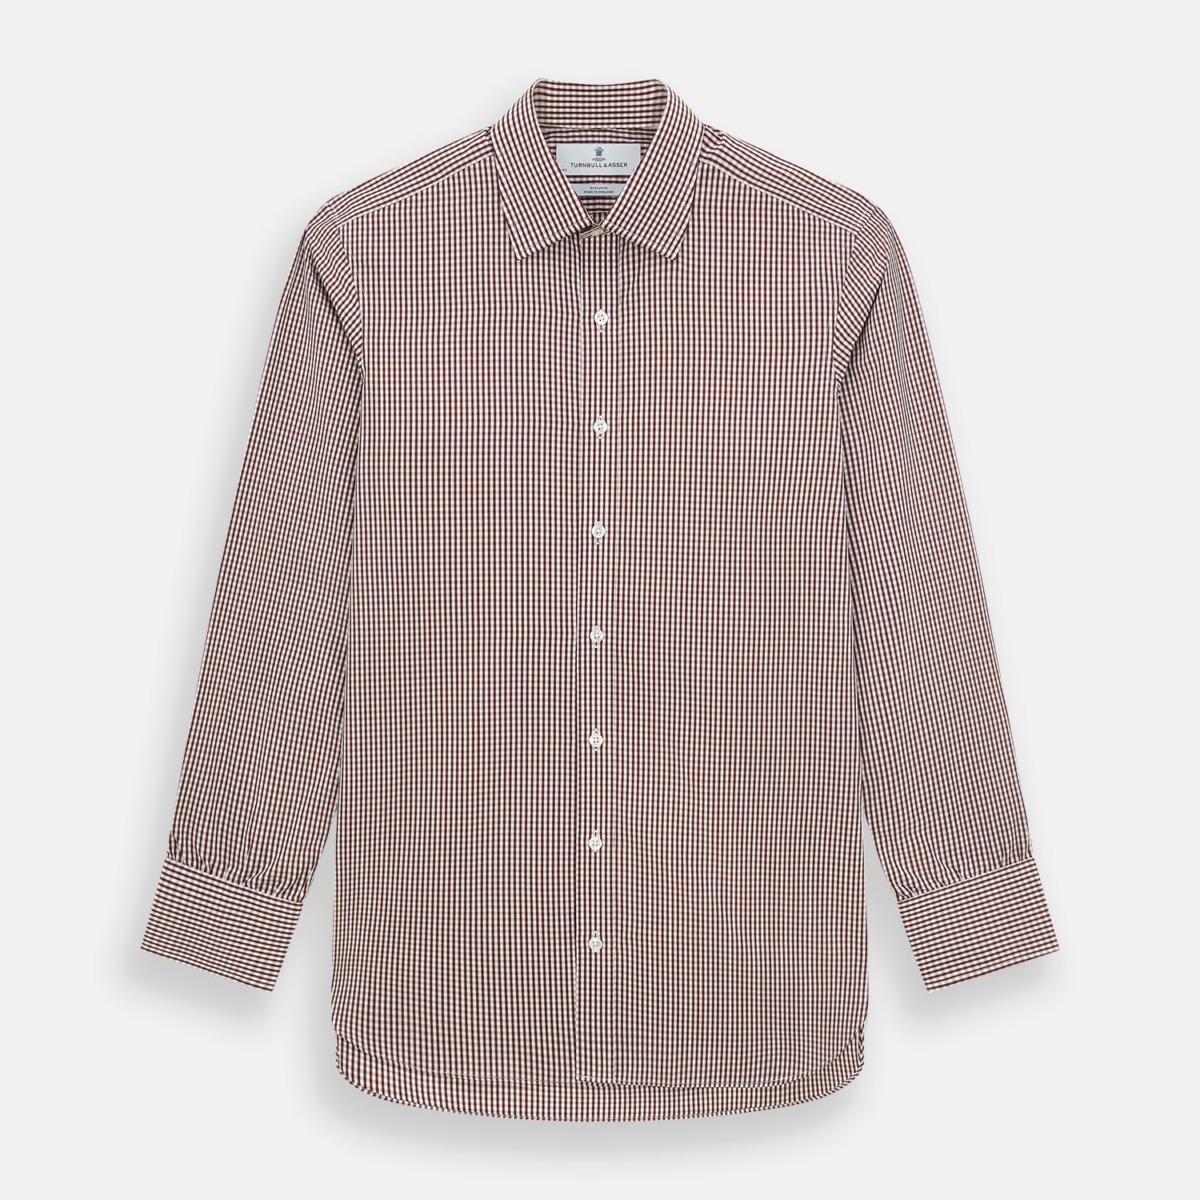 Gent Shirt in Checked Turnbull & Asser - Turnbull And Asser GOOFASH